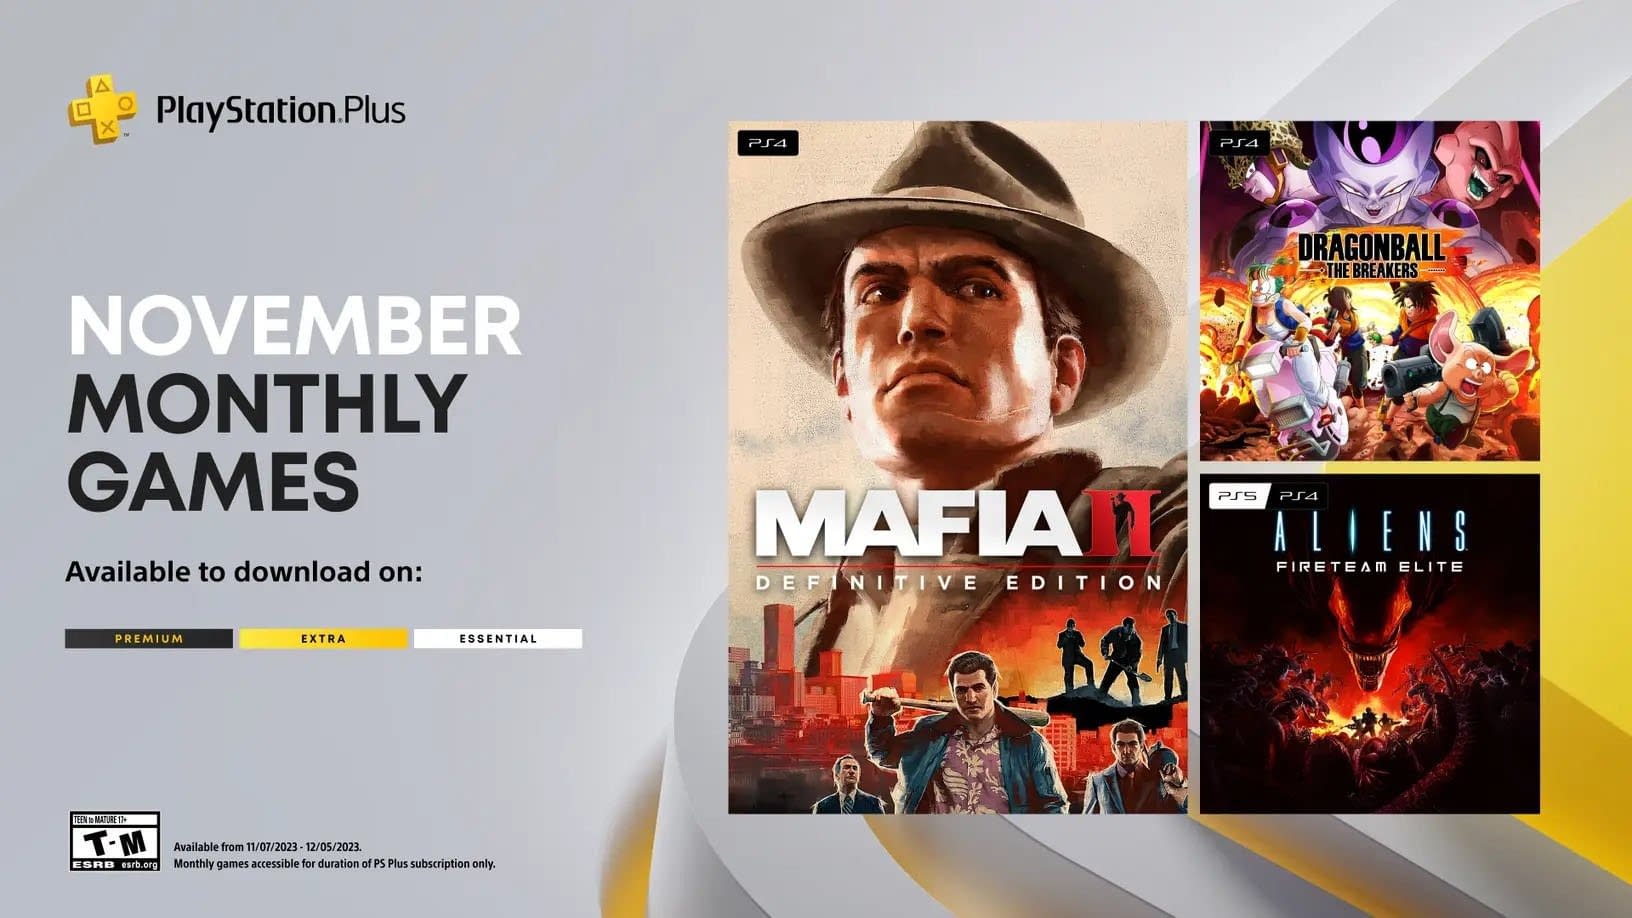 Playstation Plus November Free Games Announced: 1.500 TL Value